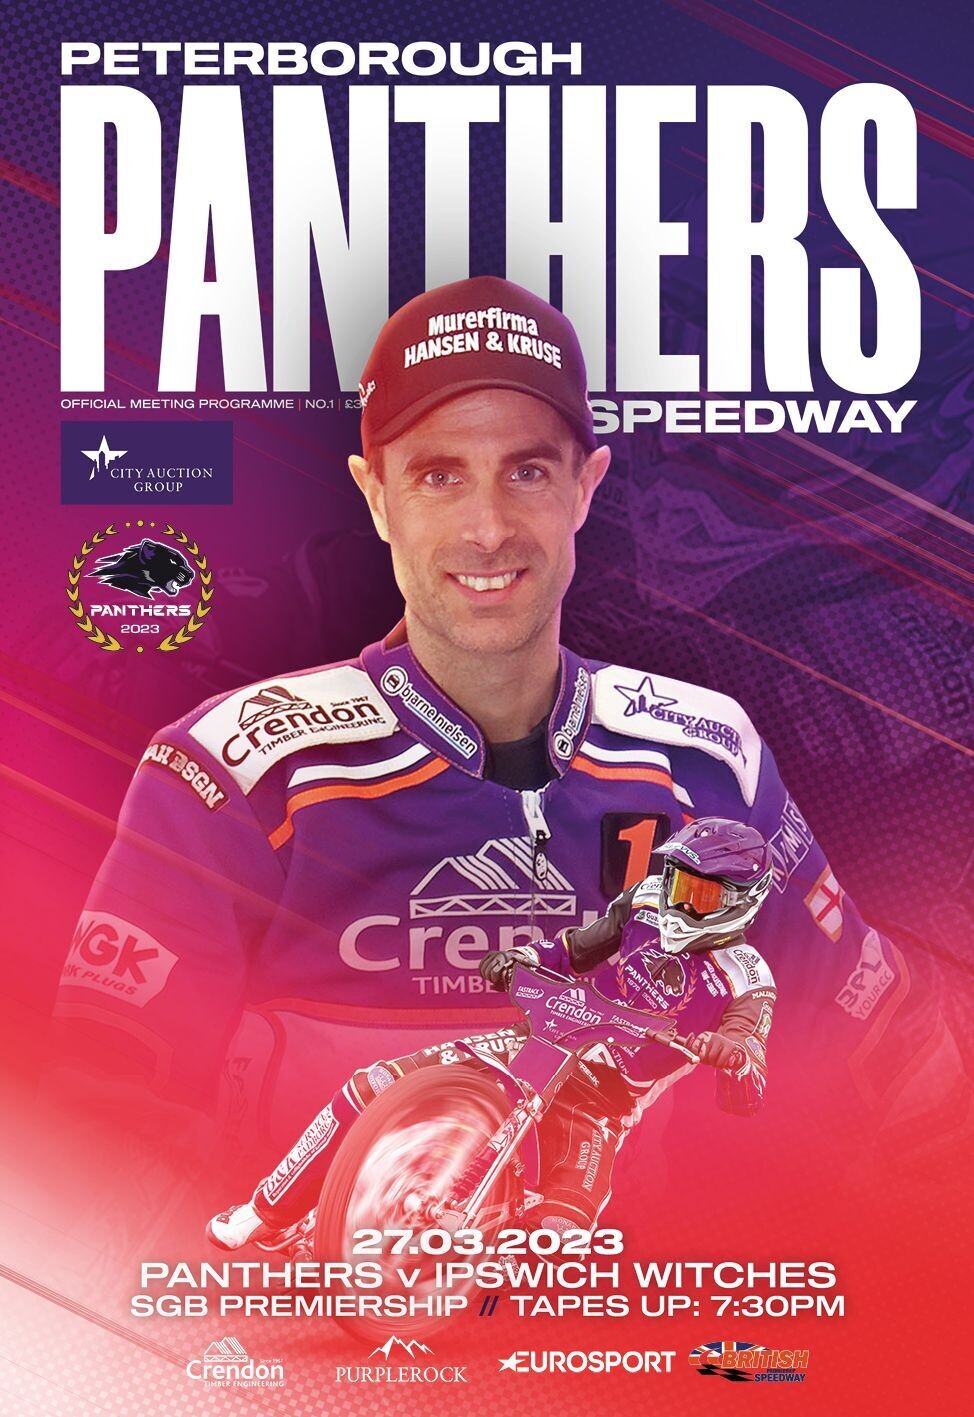 Peterborough Panthers v Ipswich Witches - 27/03/23